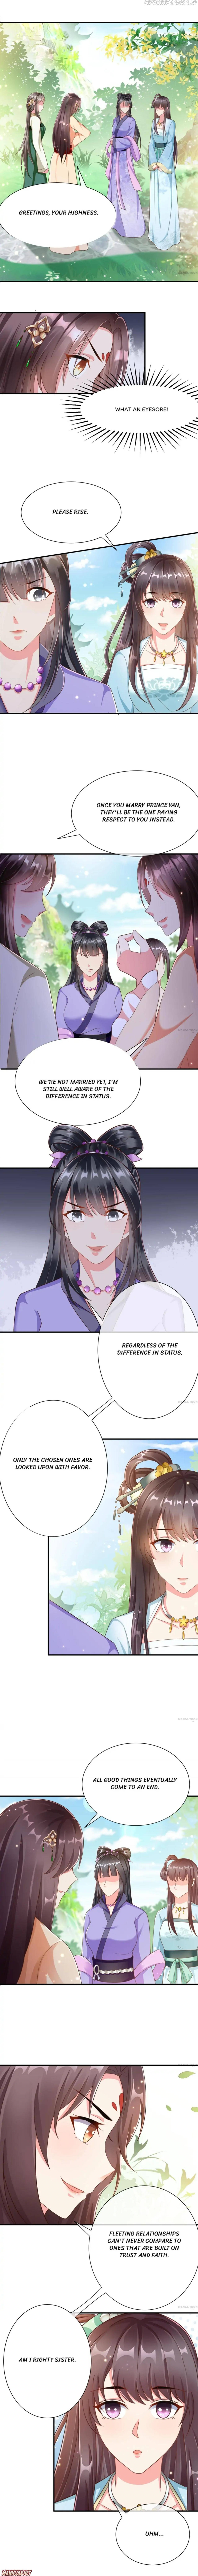 Why The Princess Acts Like White Lotus - Page 2